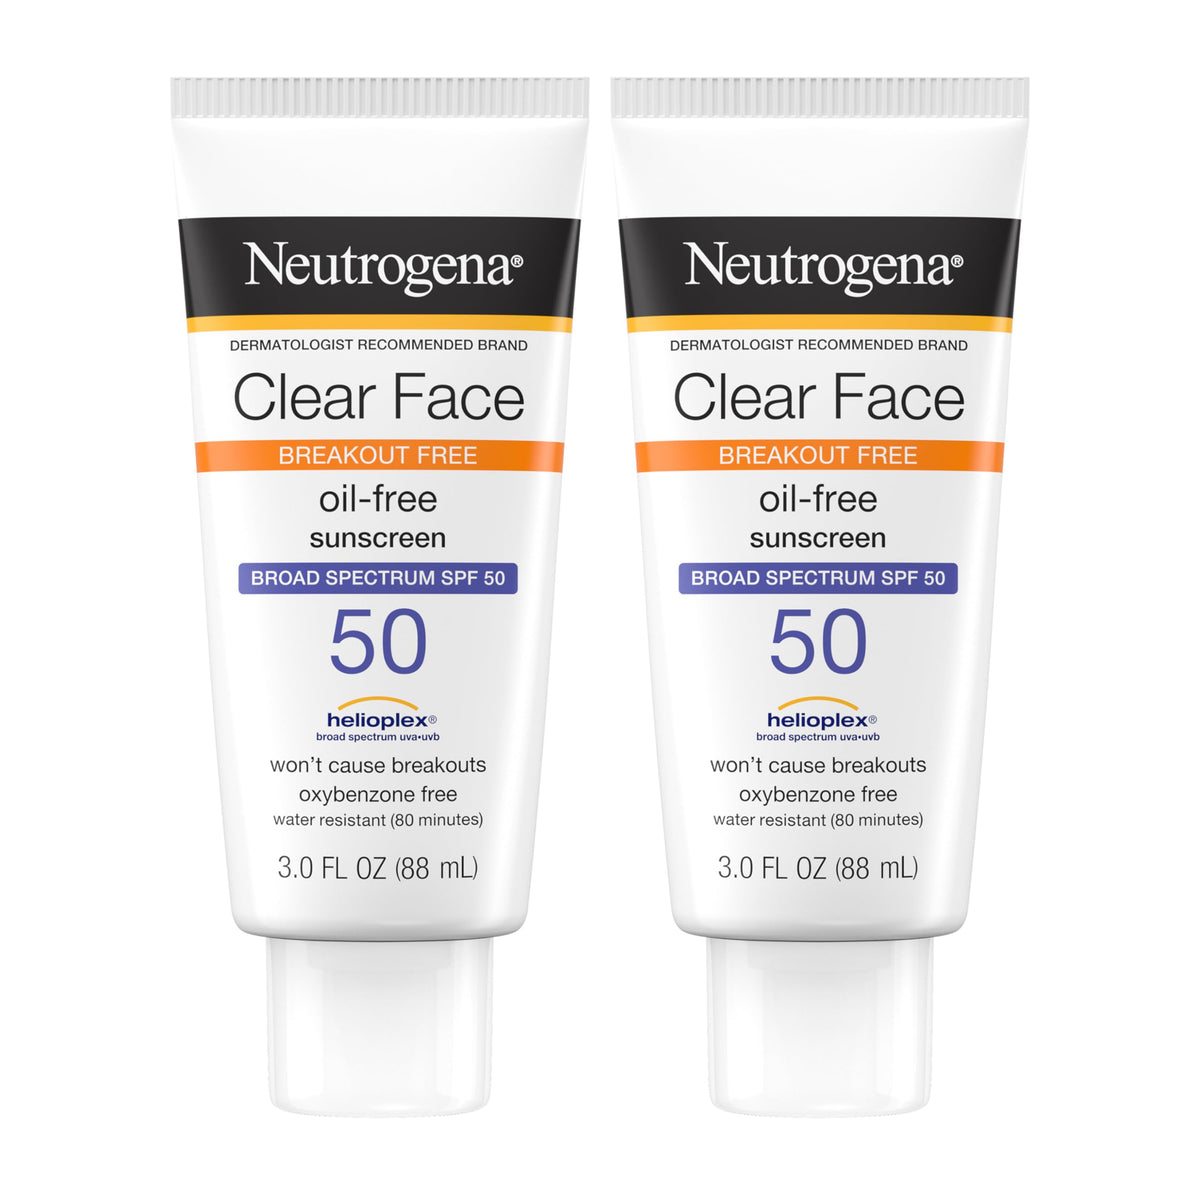 Neutrogena Clear Face Liquid Lotion Sunscreen for Acne-Prone Skin, Broad Spectrum SPF 50 Protection, Oil-, Fragrance- & Oxybenzone-Free Sunscreen, Non-Comedogenic, Twin Pack, 2 x 3 fl. oz